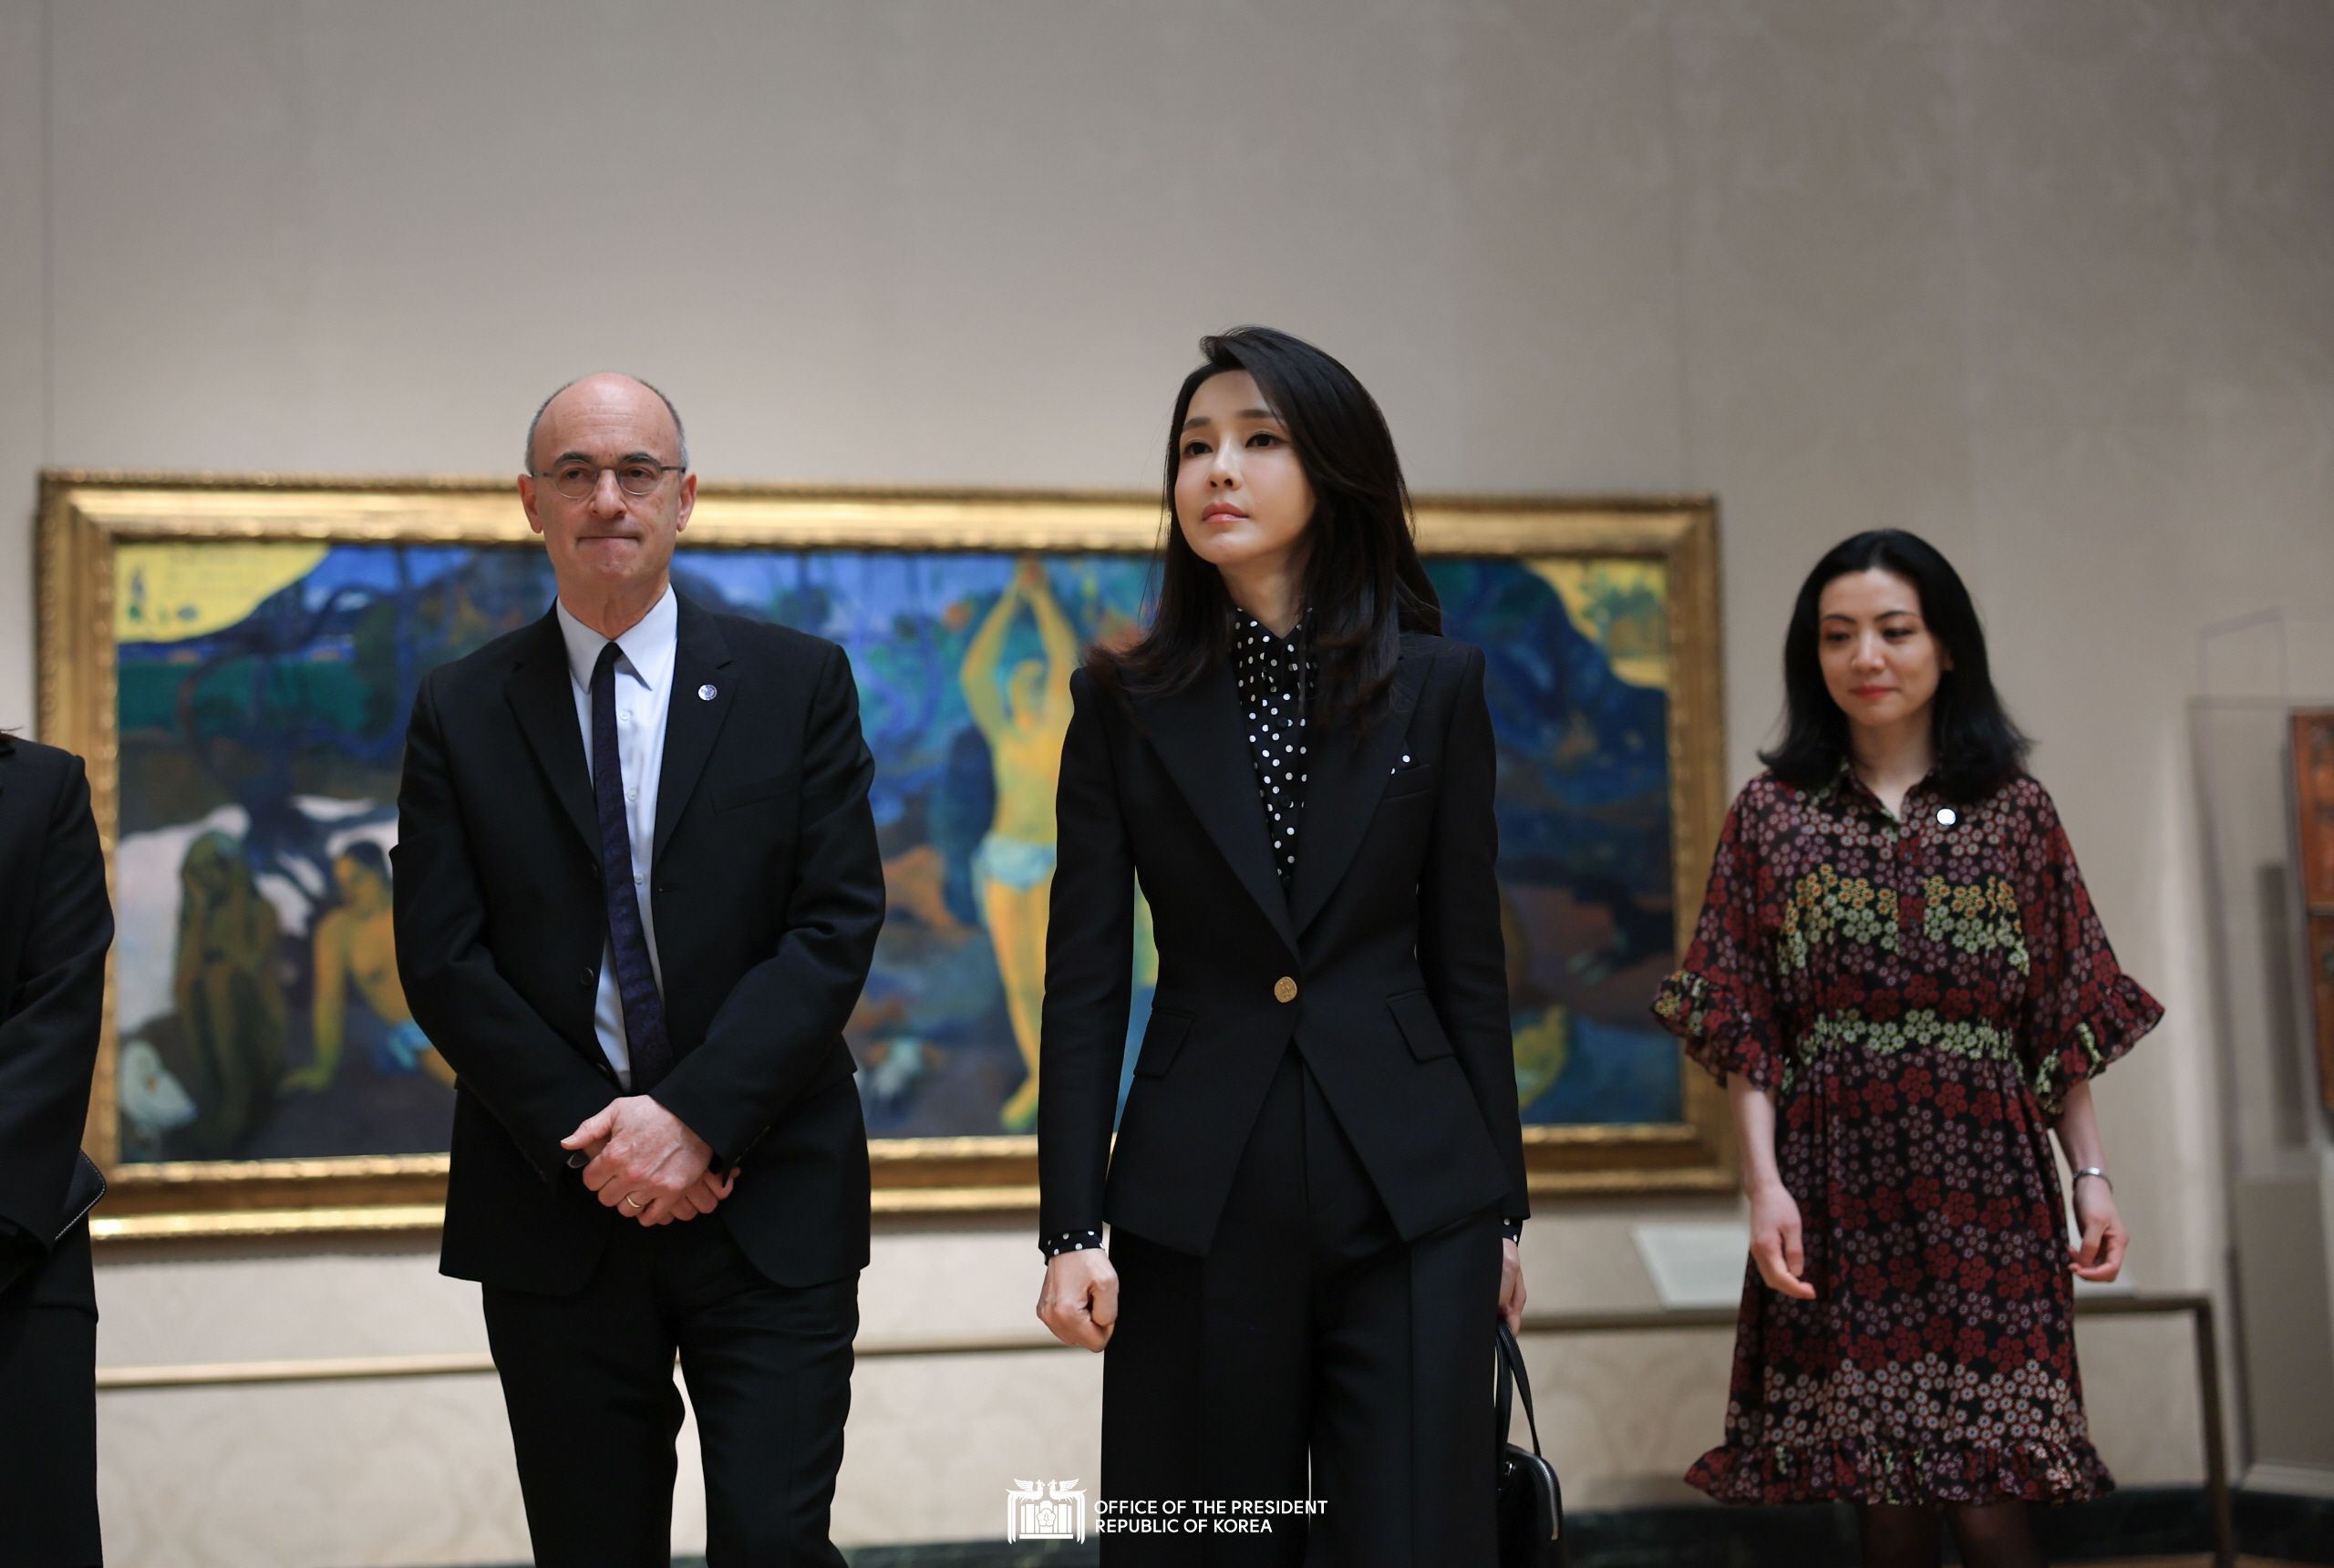 First Lady Kim Keon Hee visiting the Museum of Fine Arts, Boston Slide6